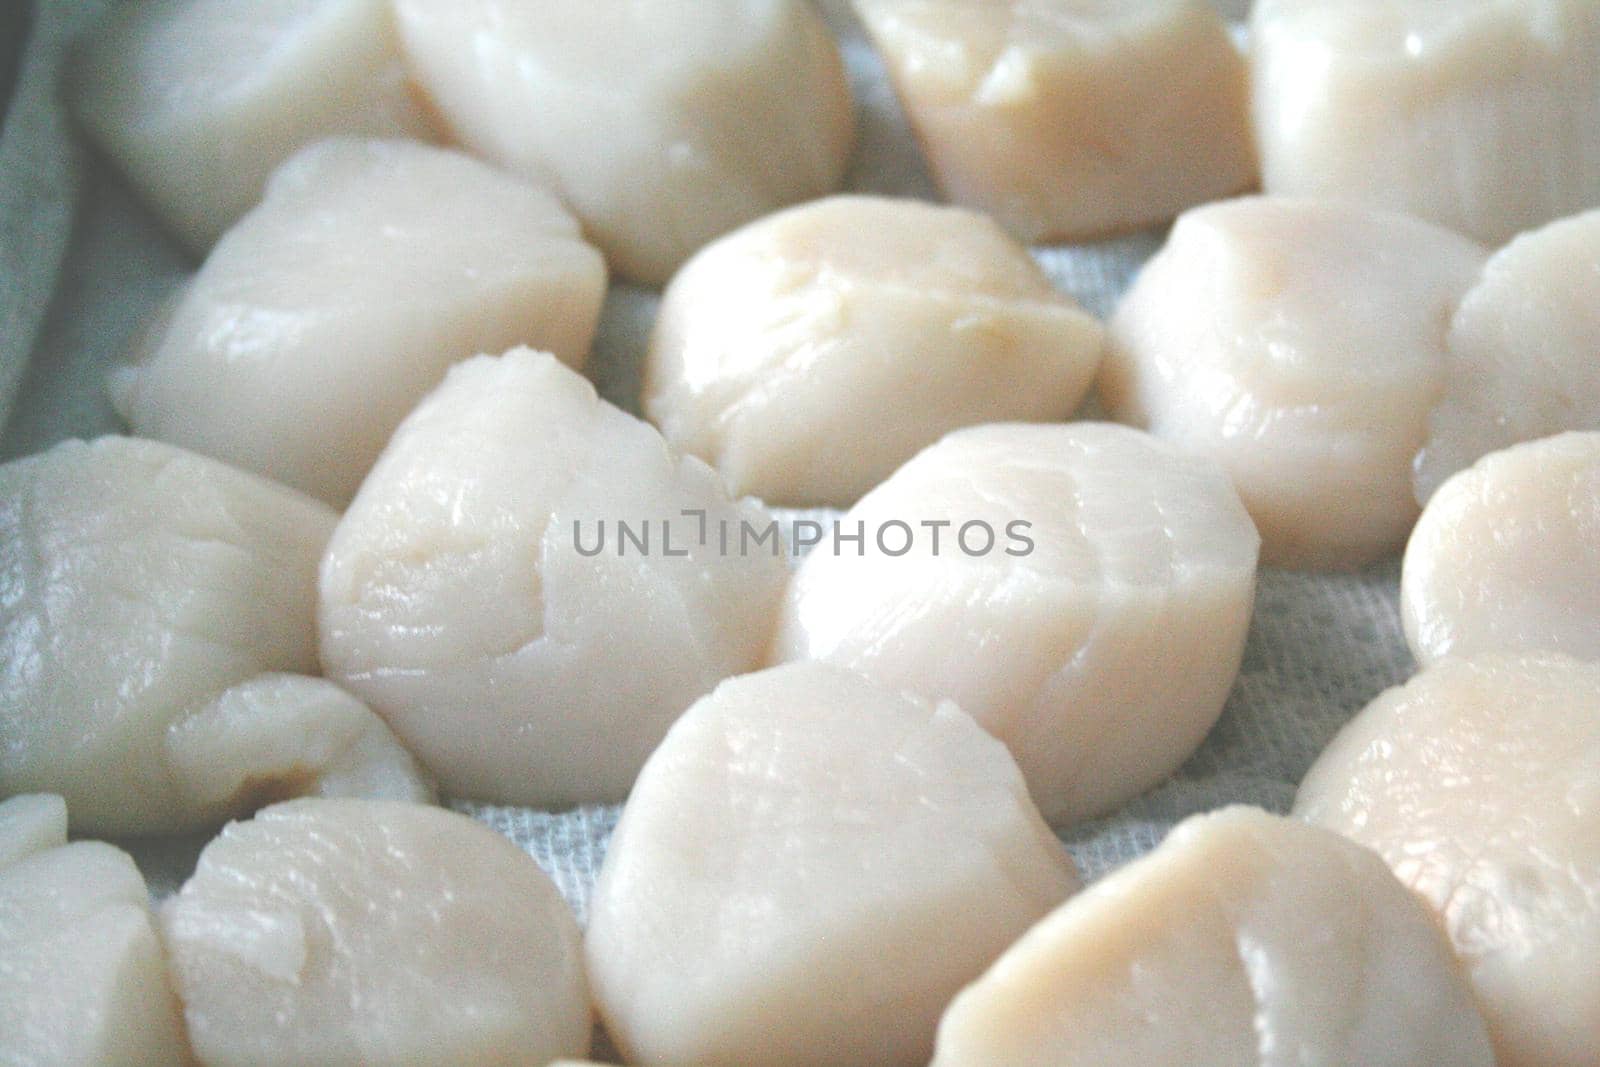 Group of delicious looking raw white scallops ready to be eaten from the sea 